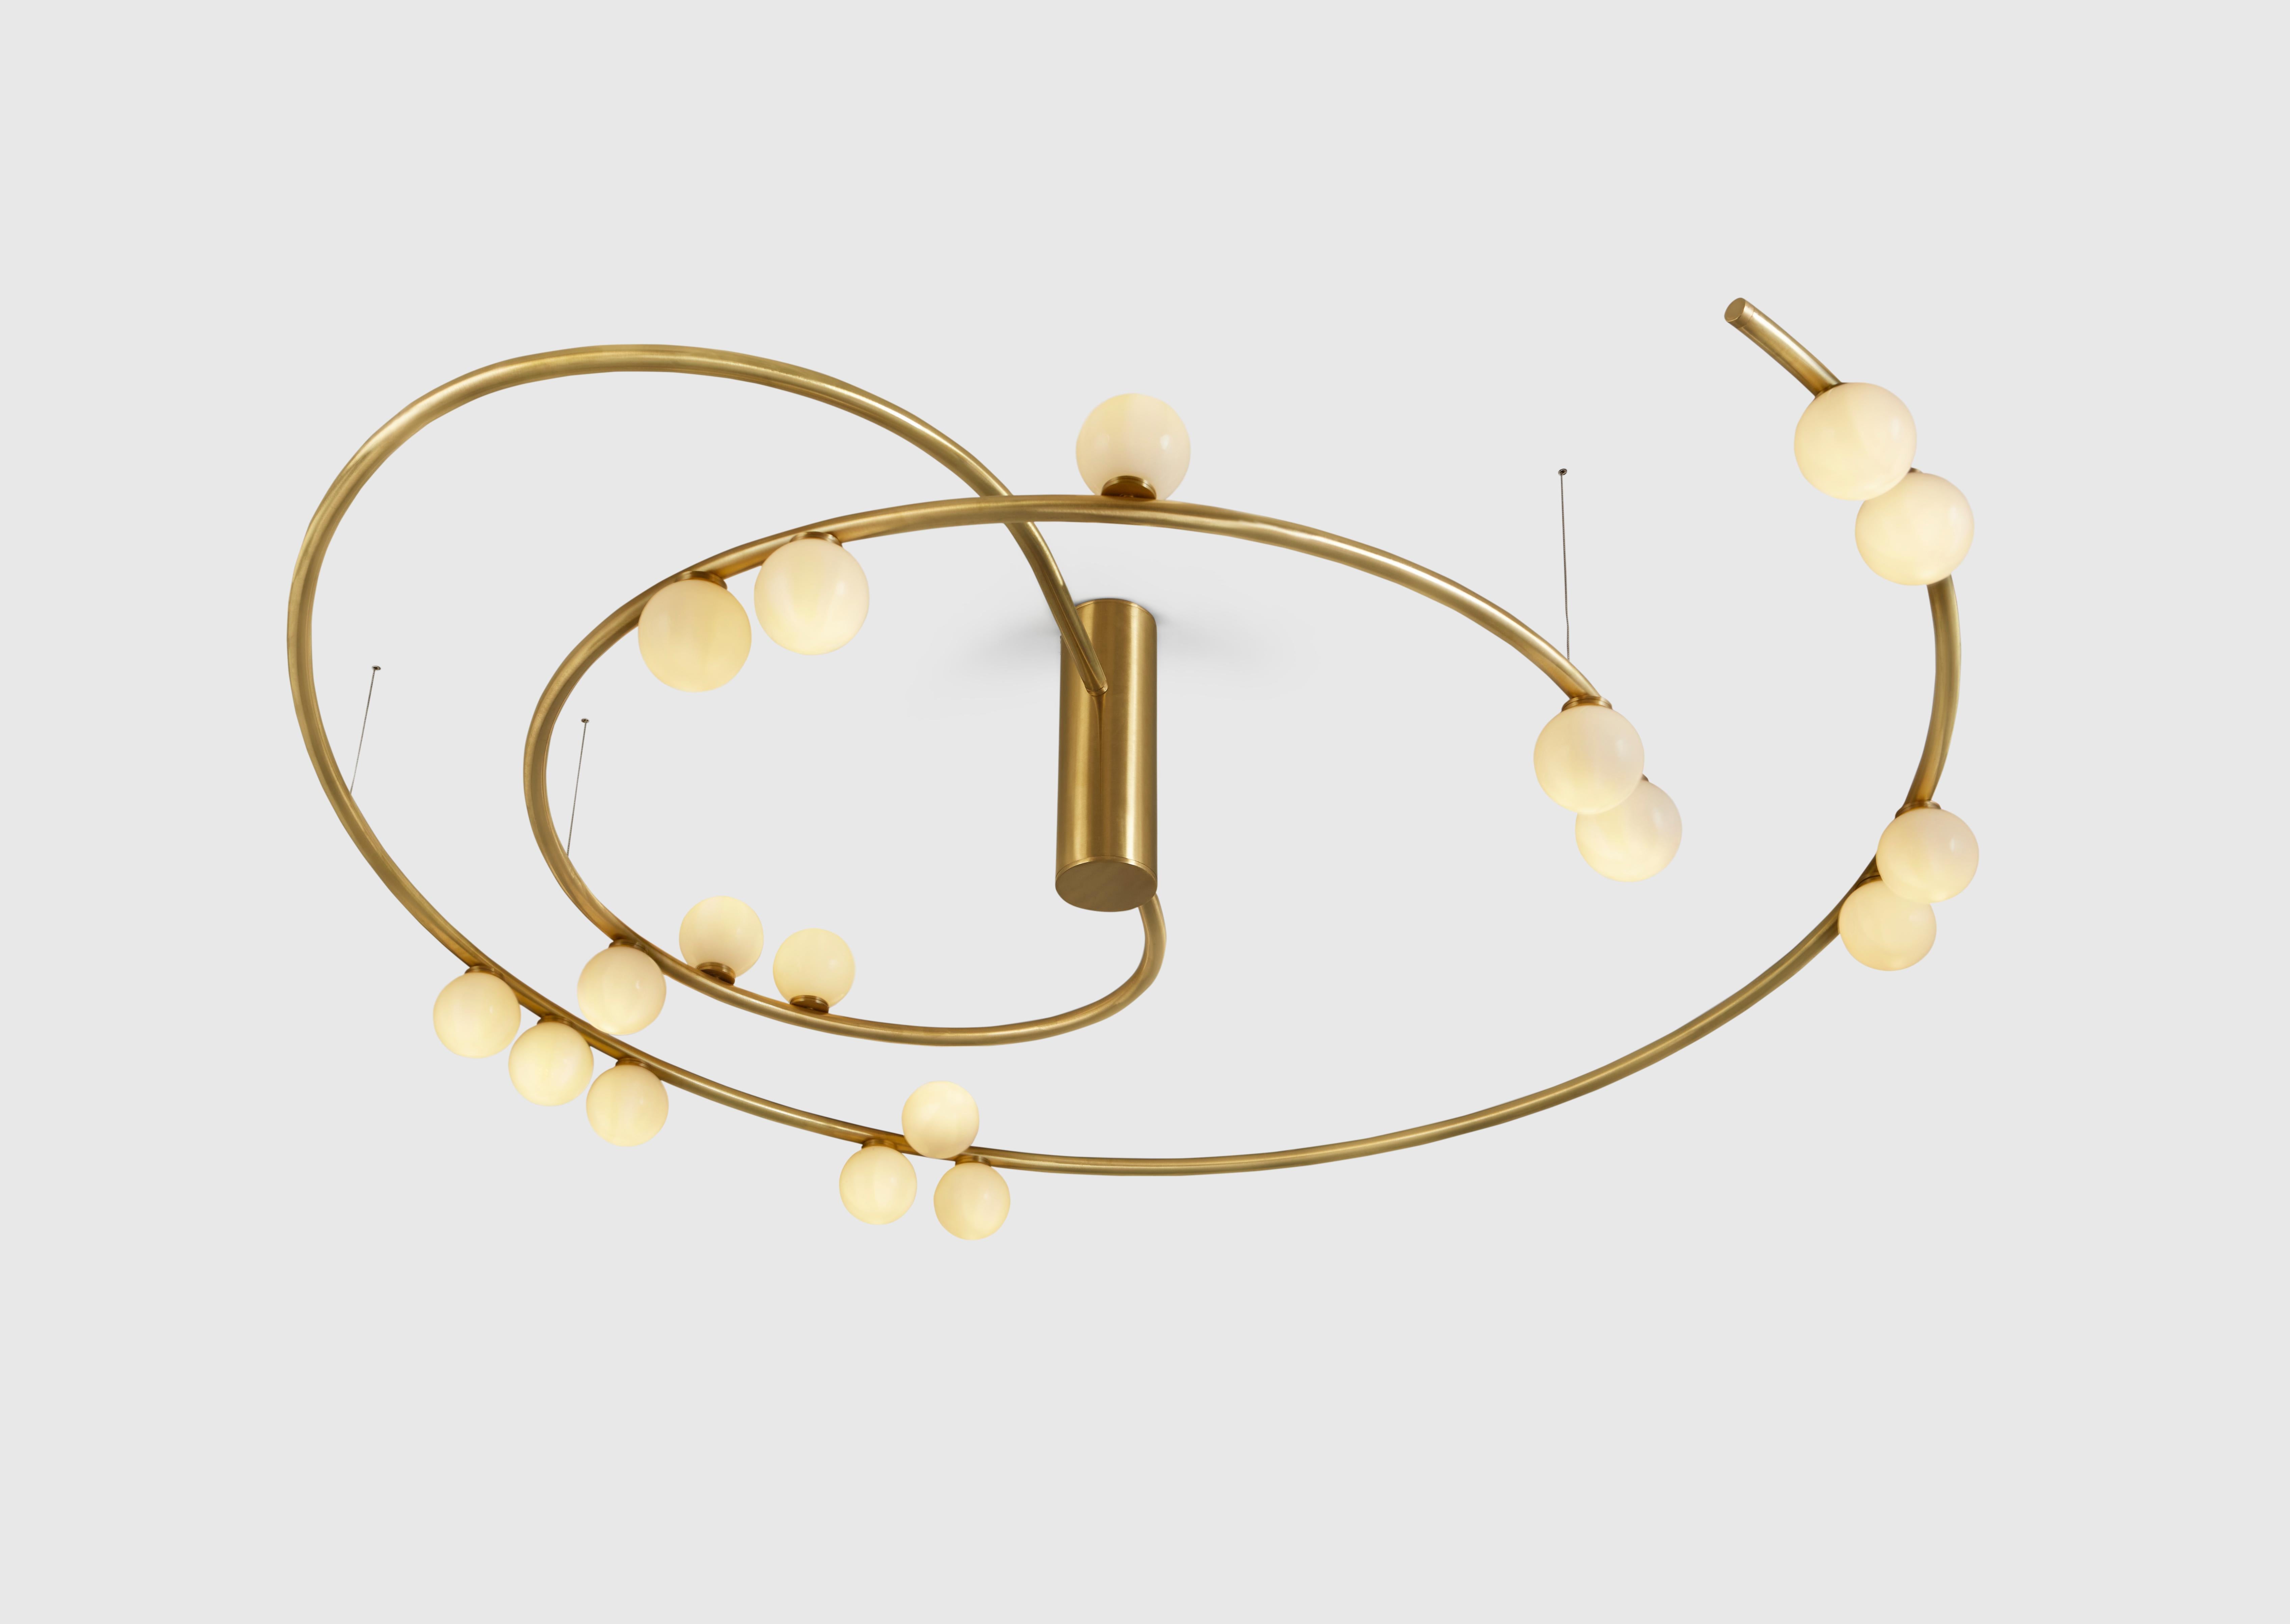 Unique swirl chandelier by Hatsu
Dimensions: D 130 x W 123 x H 20.32 cm 
Materials: Brass, glass

Hatsu is a design studio based in Mumbai that creates modern lighting that are unique and immediately recognisable. We started with an idea to make